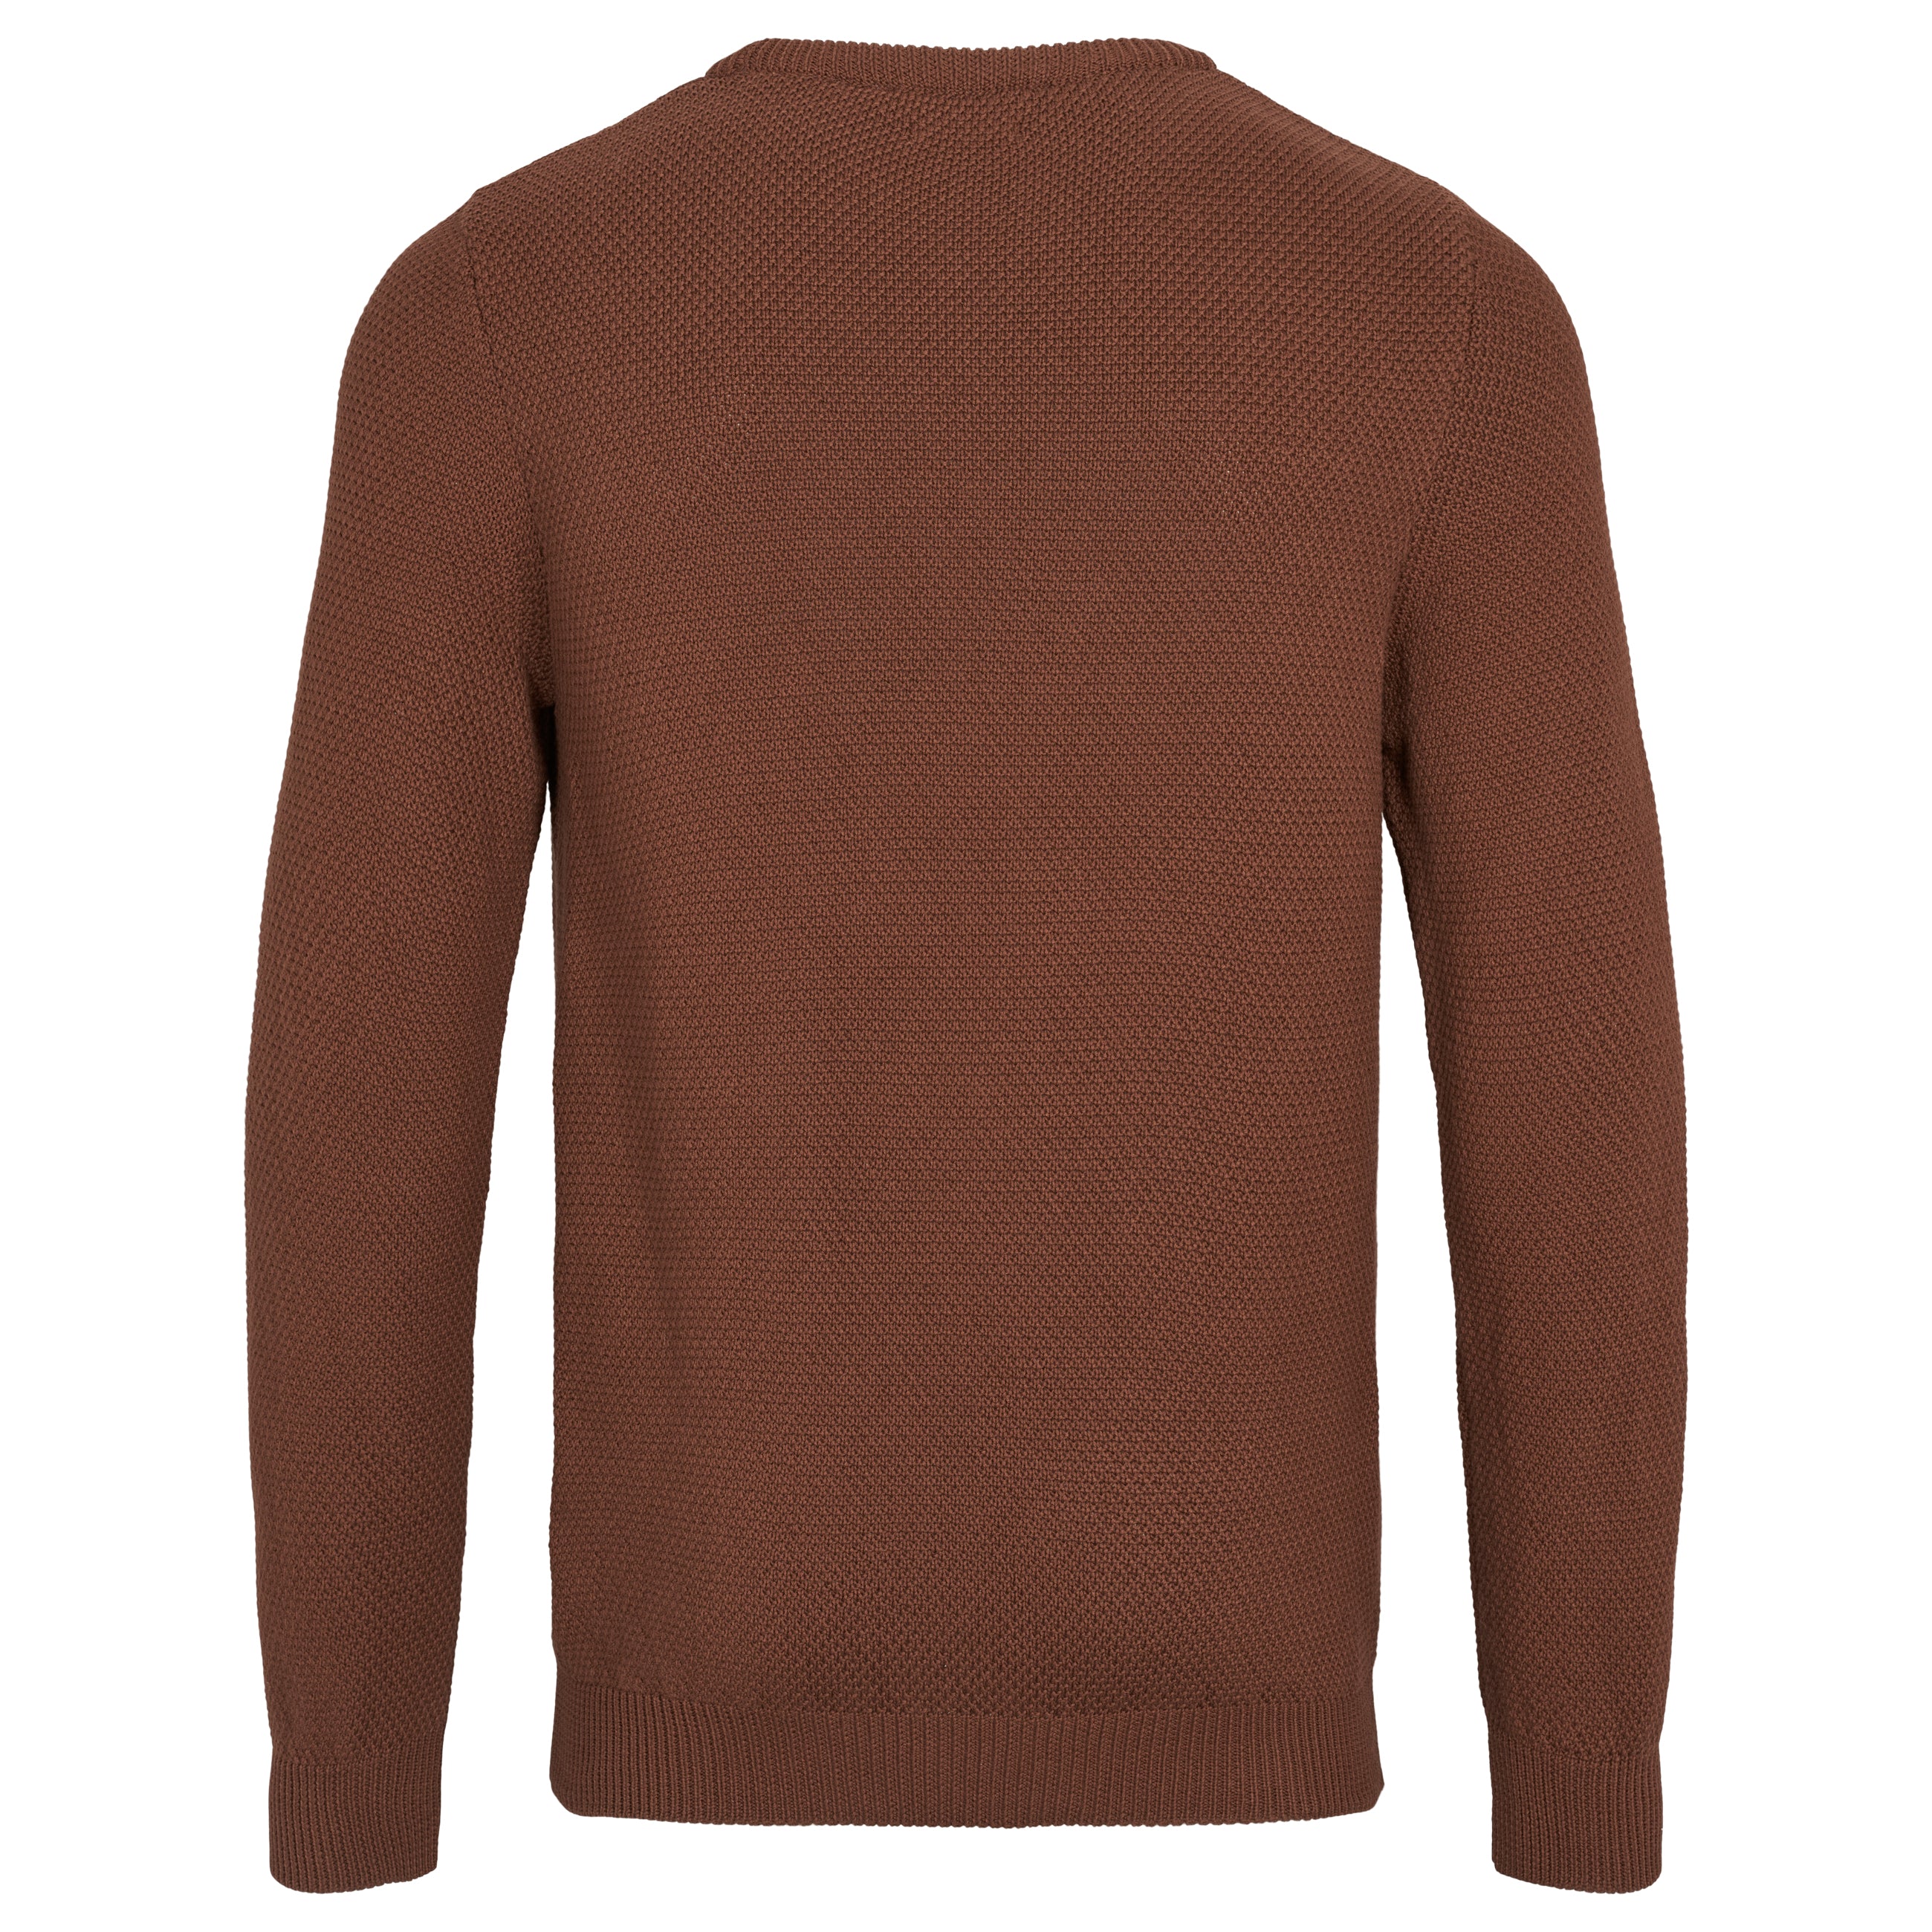 By Garment Makers The Organic Waffle Knit GOTS Knit 1258 Beaver